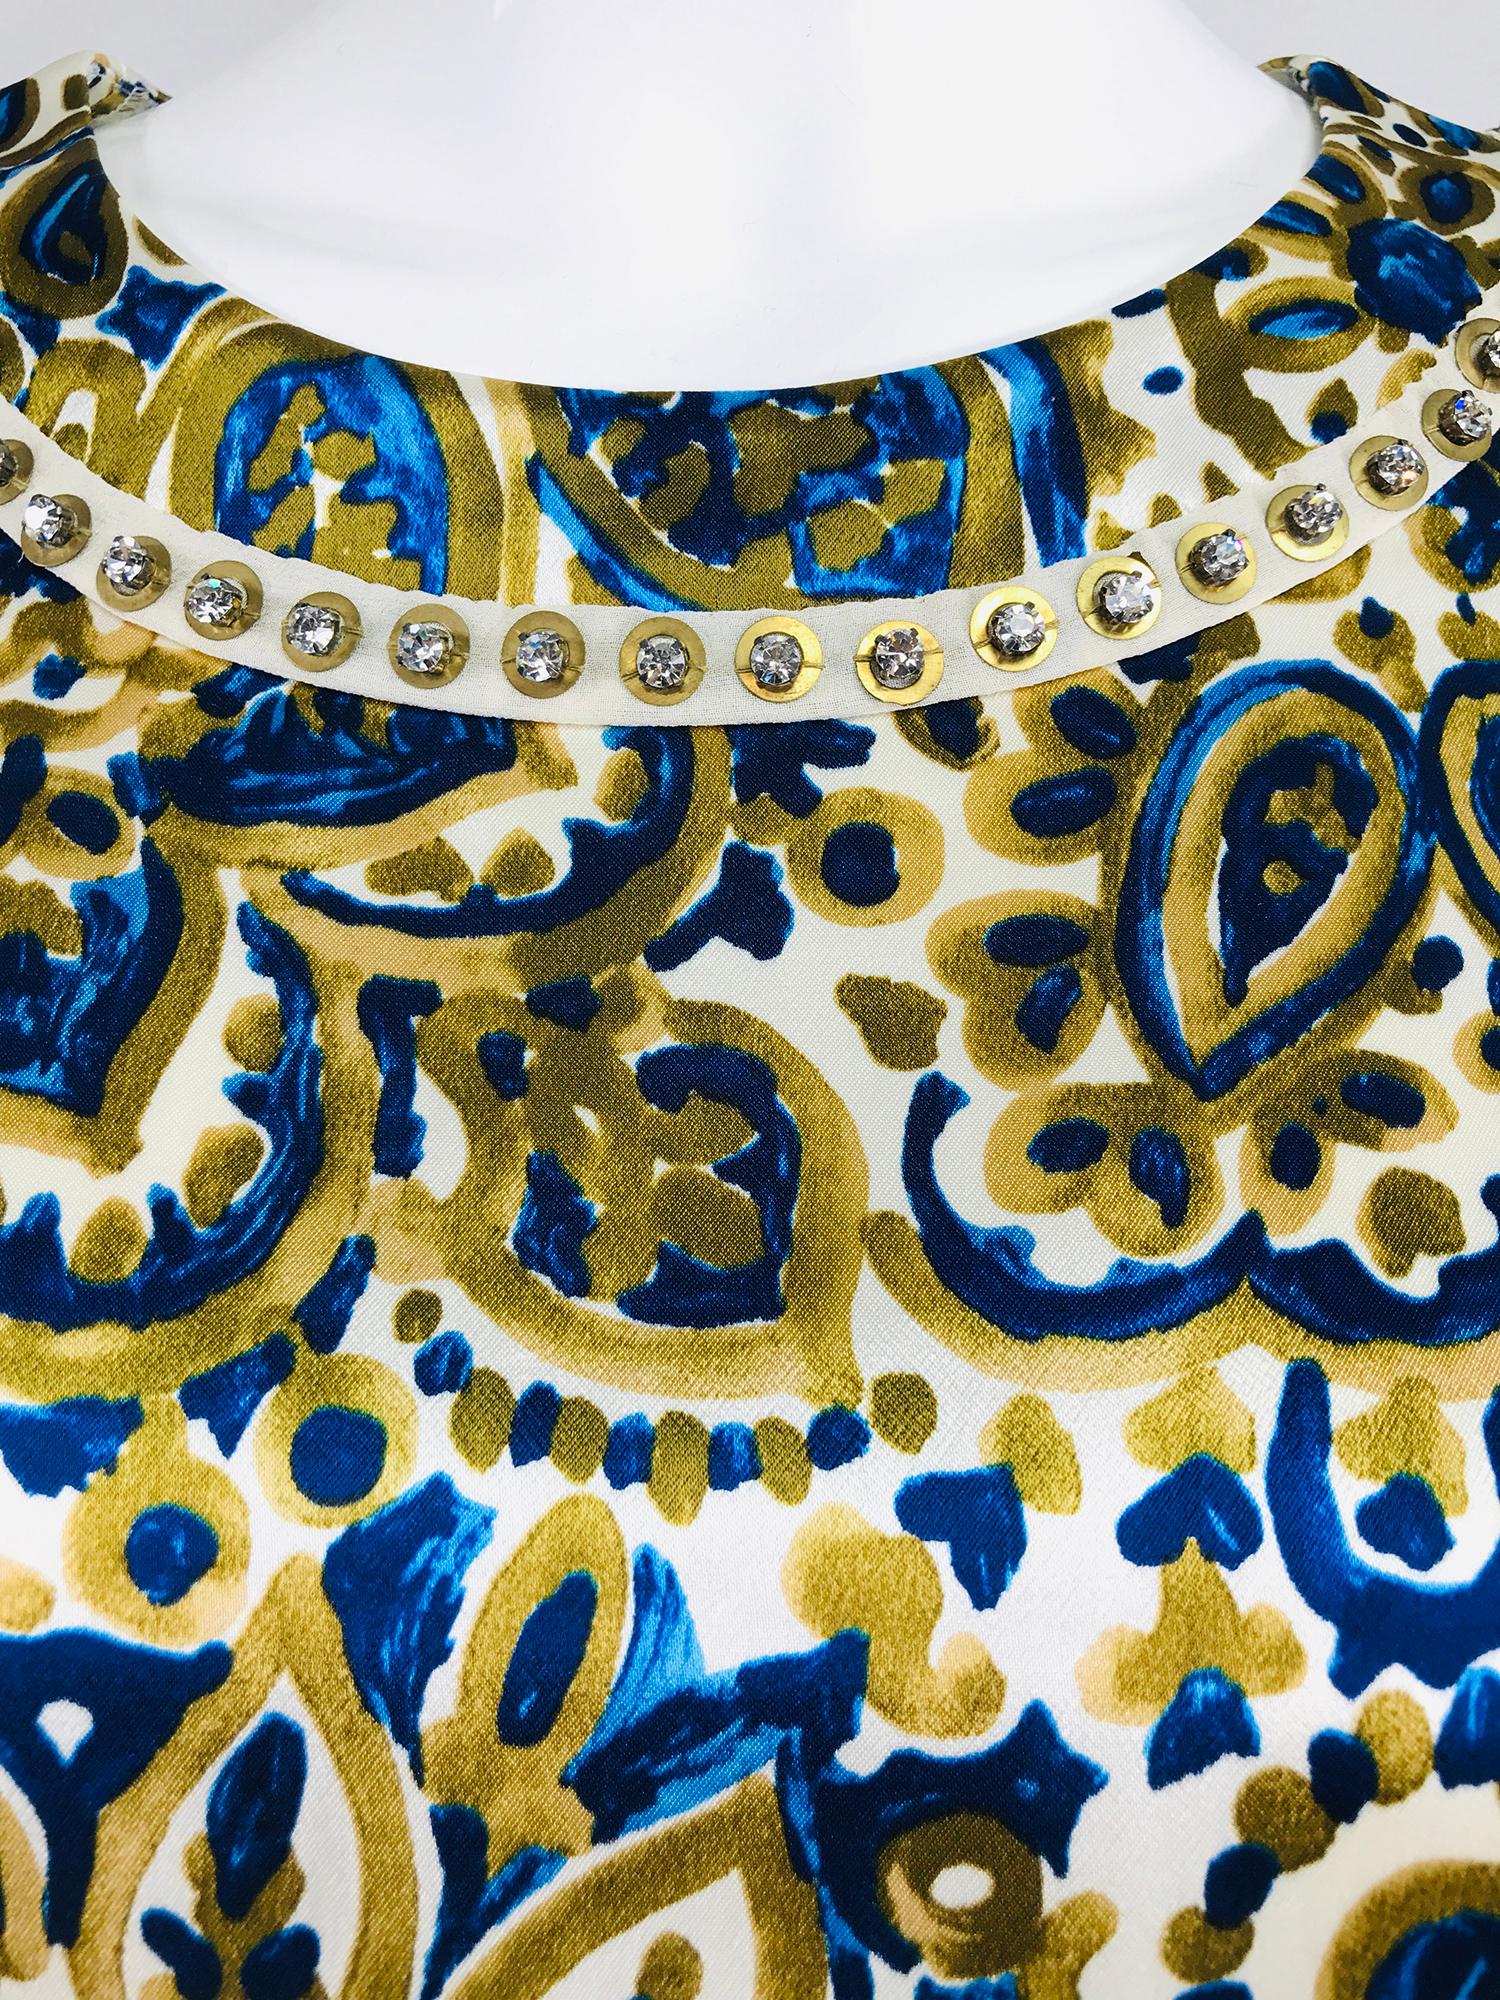 Chloe' gold and blue rhinestone jewel neckline blouse. Abstract print on a cream ground in blue and gold, the round neckline has a circular band of crystal rhinestones. 3/4 length sleeves have cuff vents. The blouse is hip length pull on style it